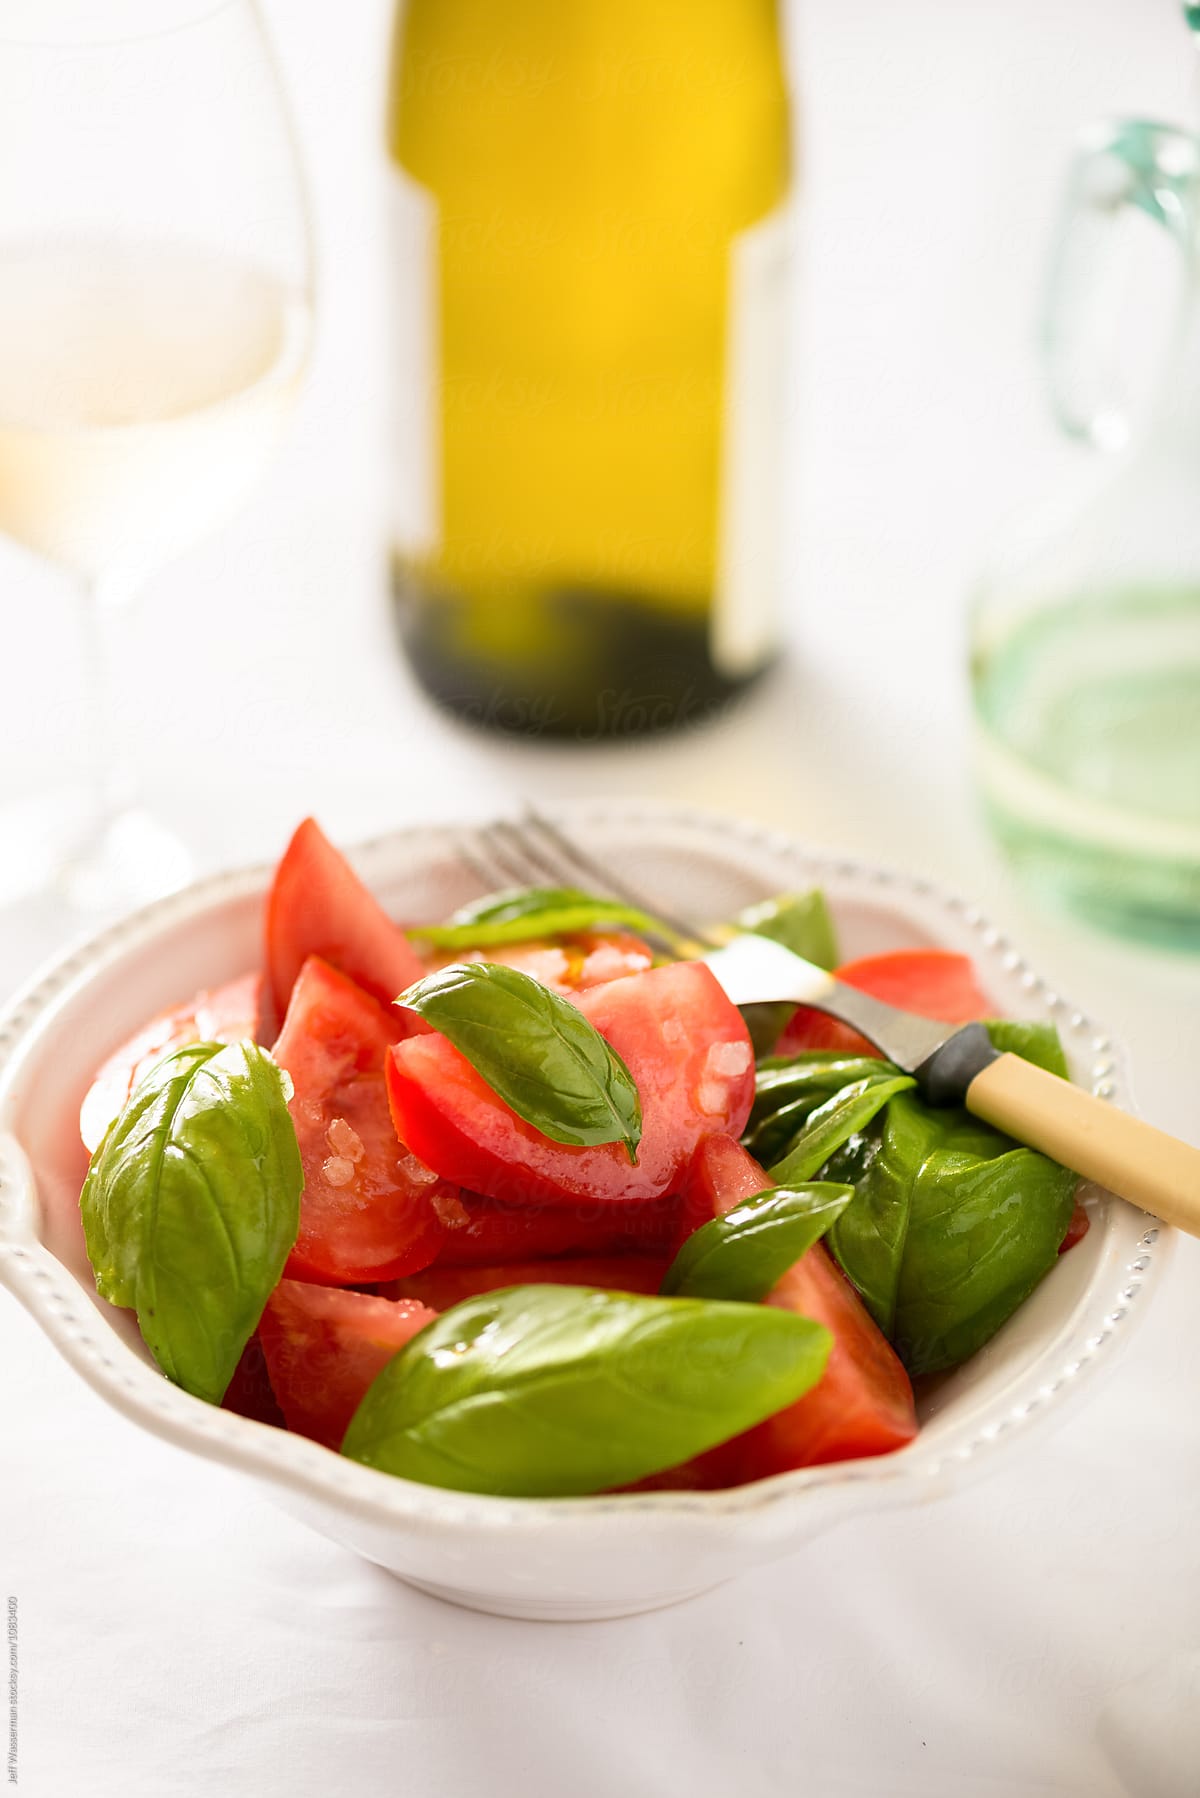 Tomato Salad with Basil in Bowl